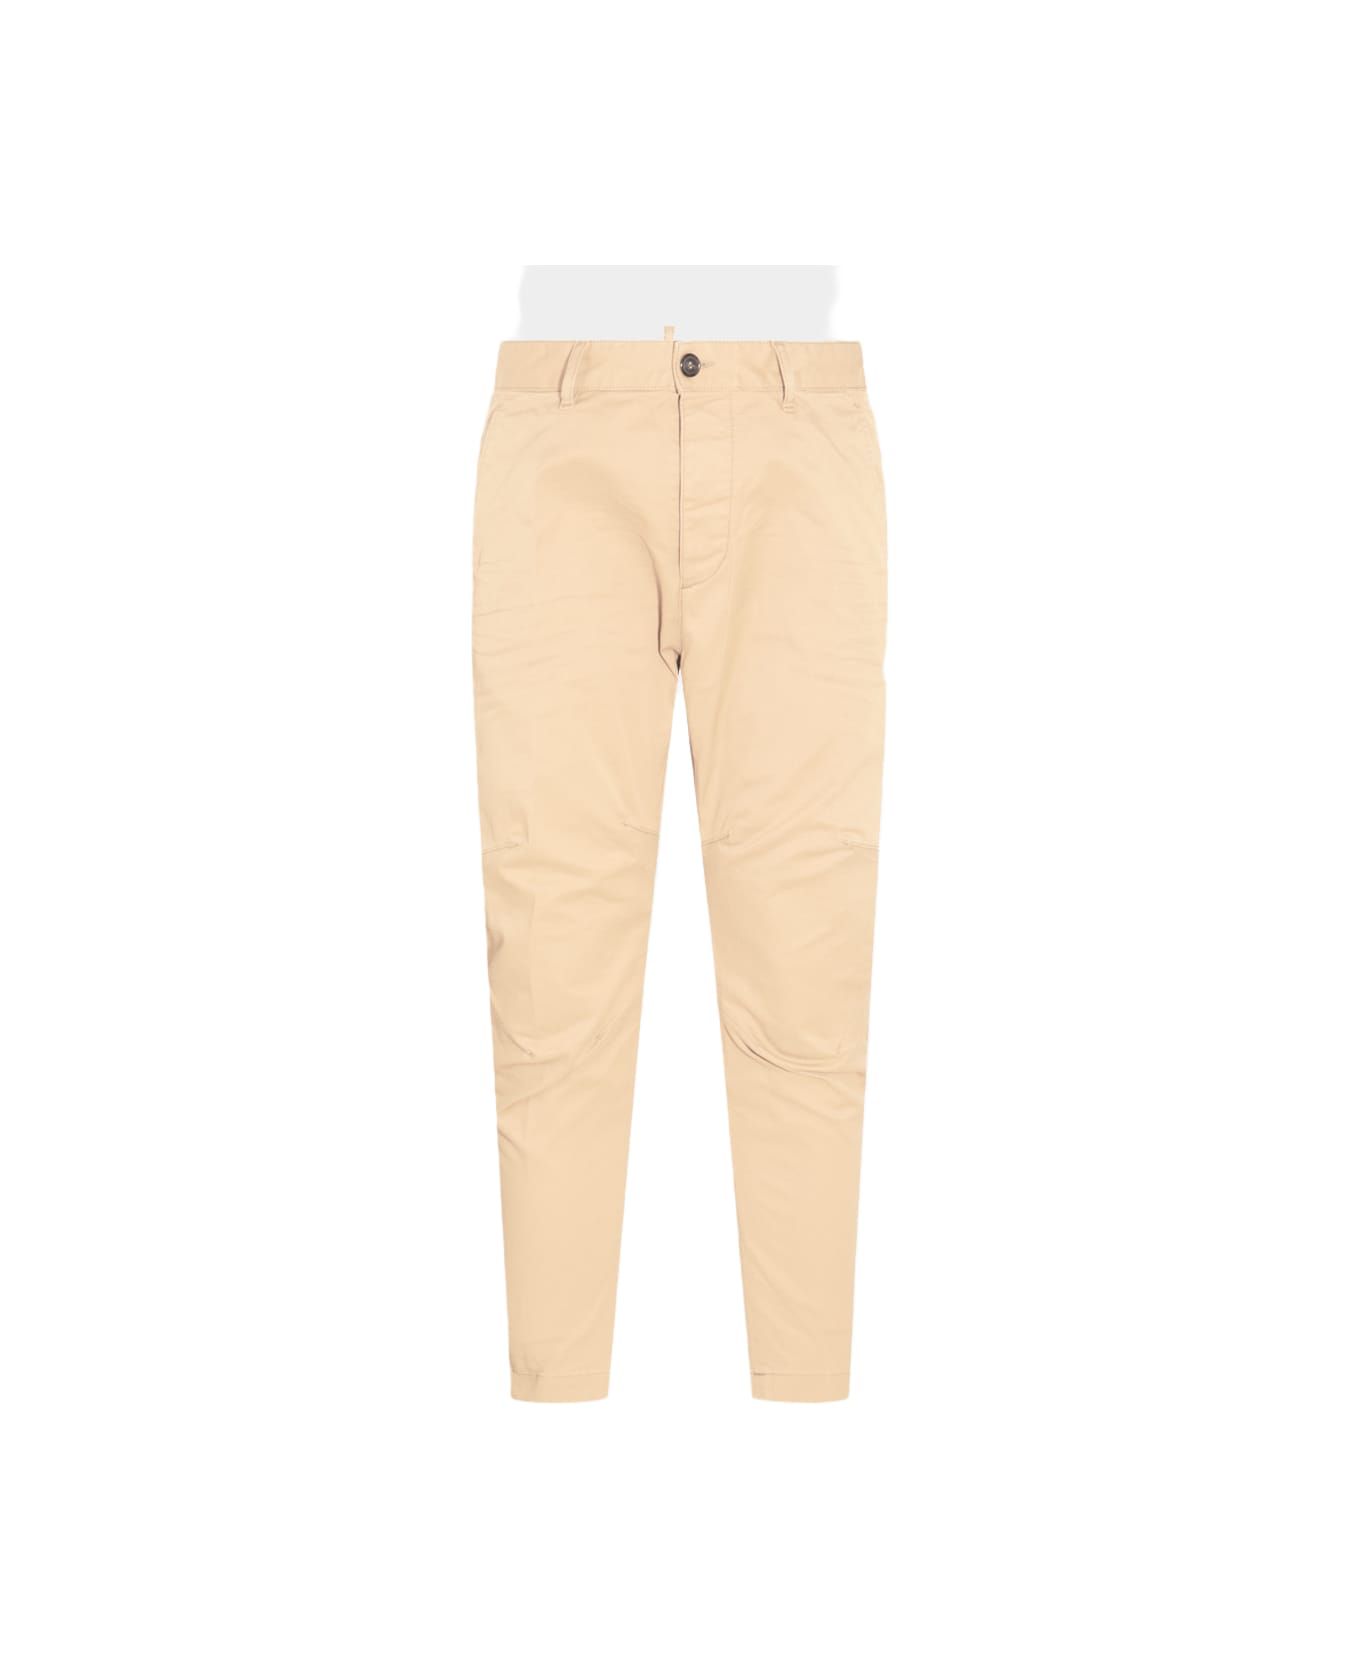 Dsquared2 Beige Cotton Blend Trousers - Stone